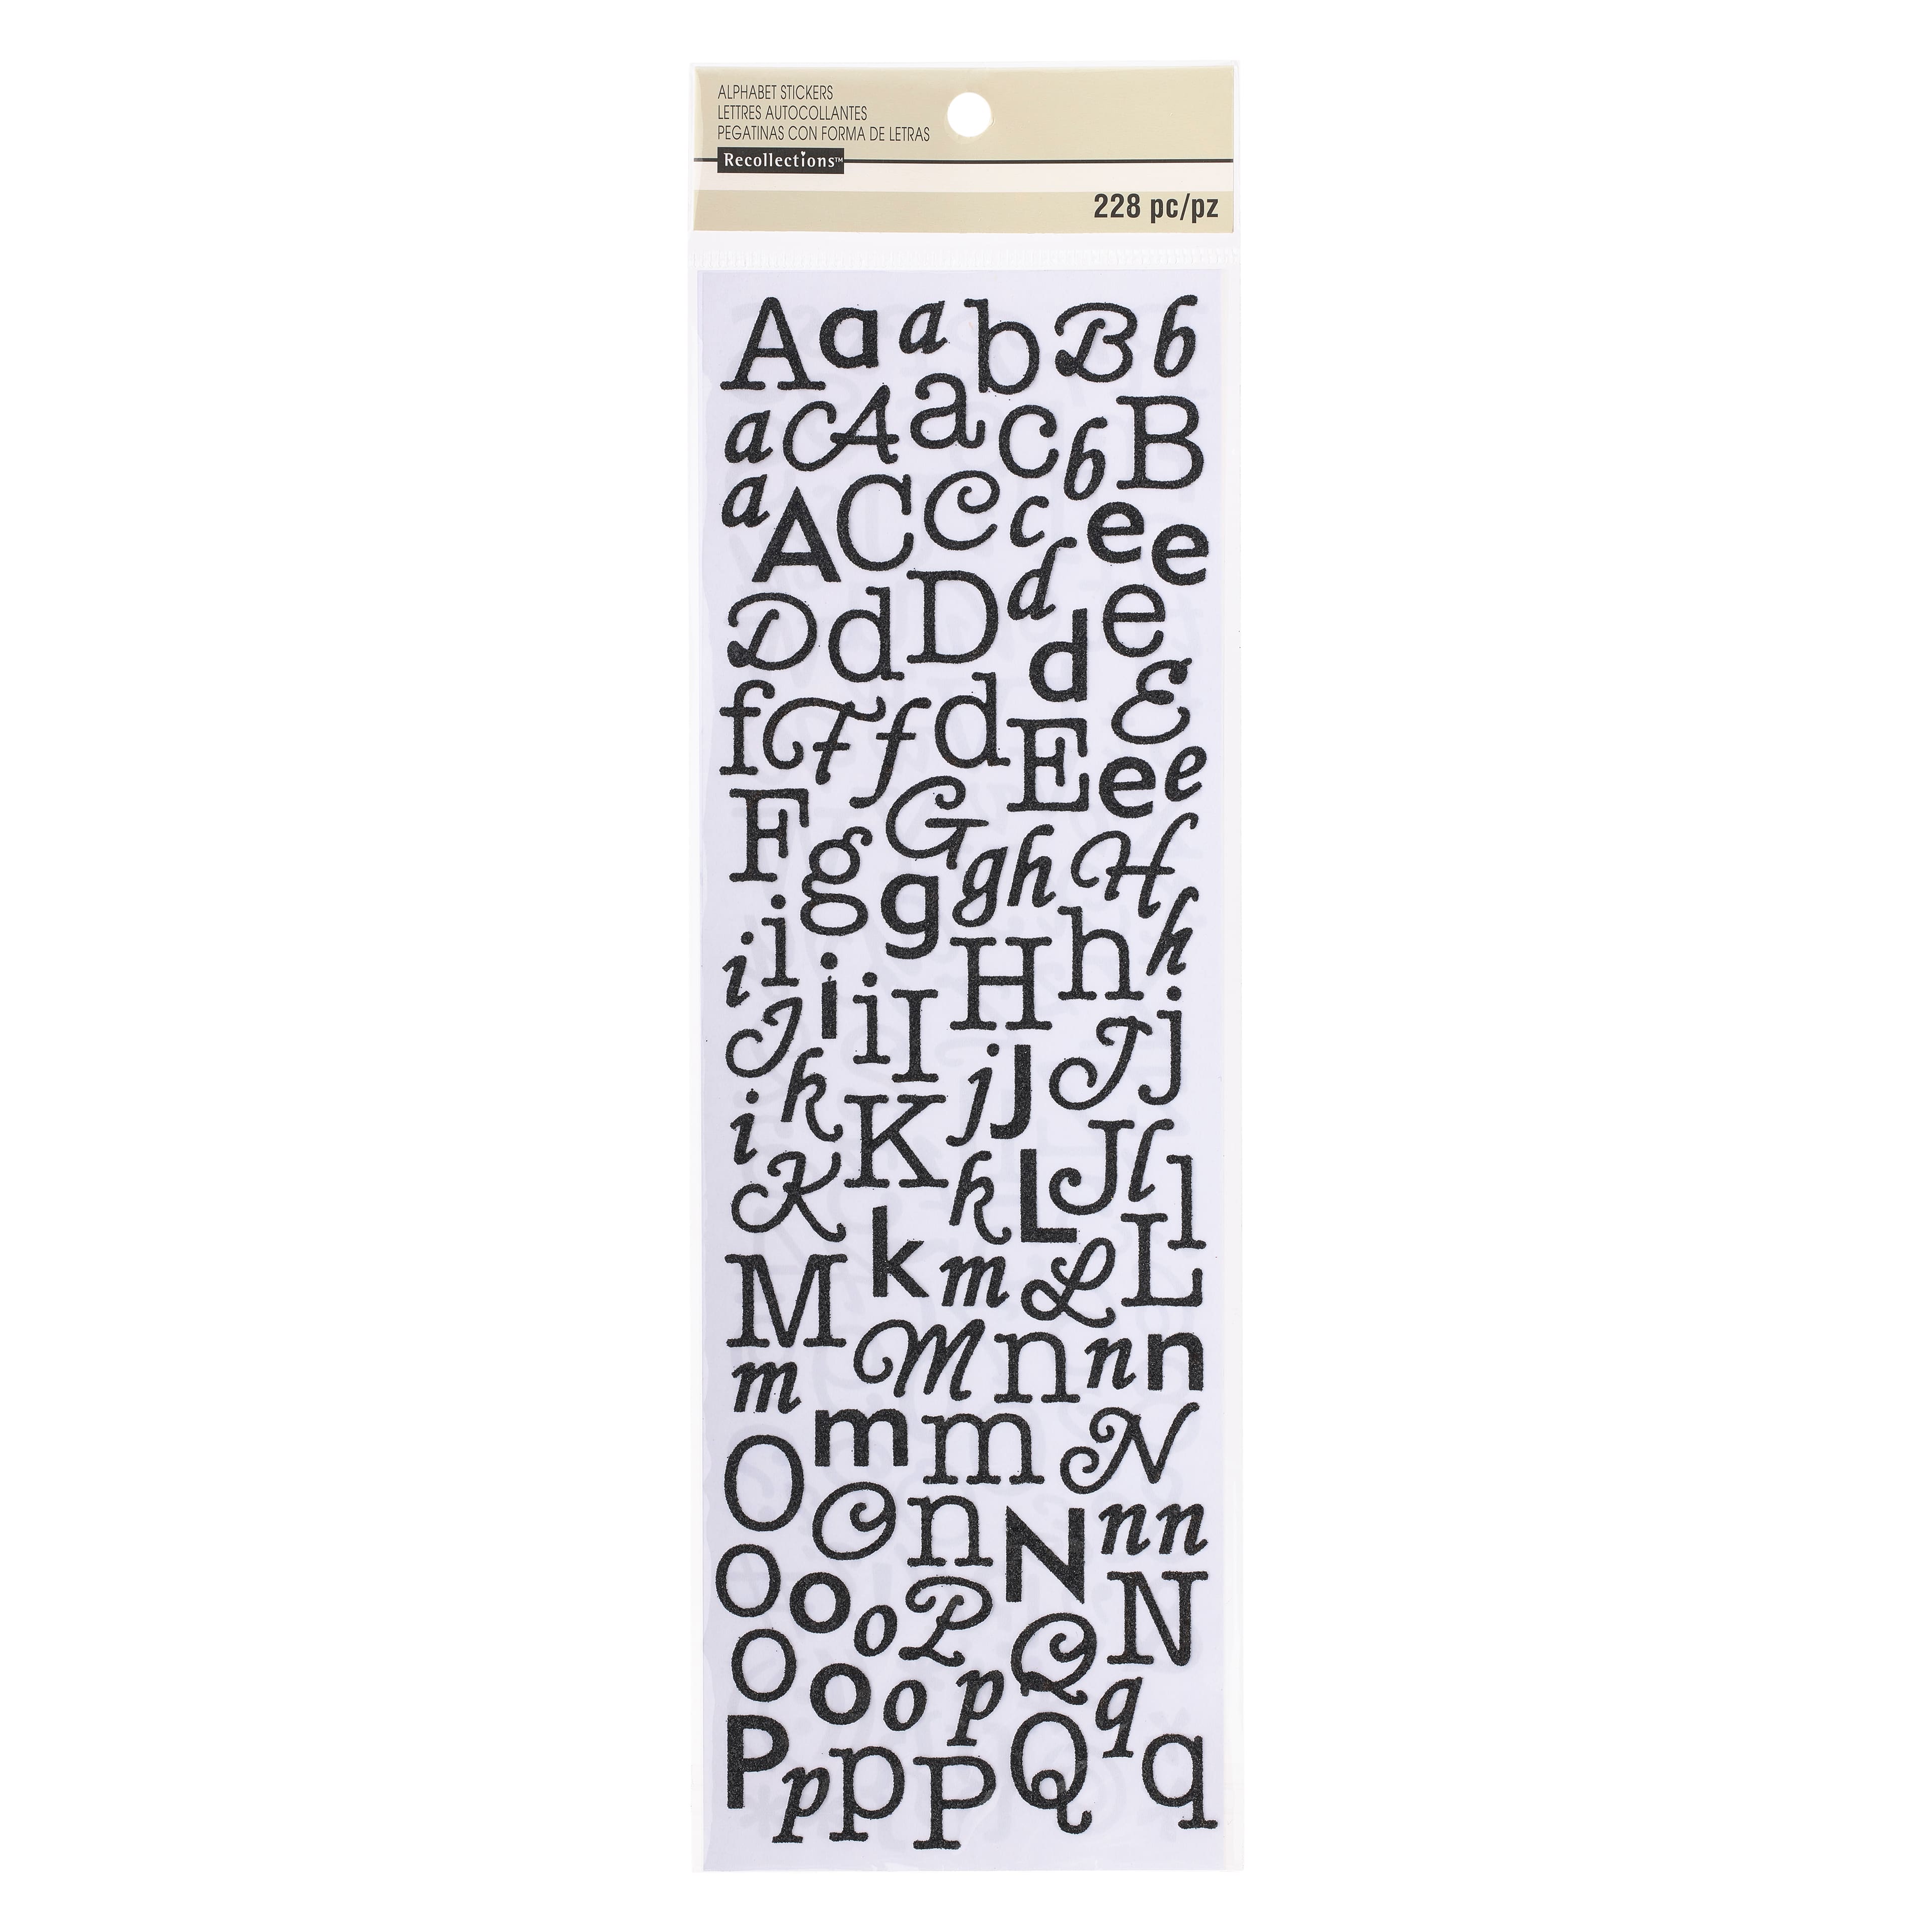 Q, X & Z - Athletic Jersey Letter Sheets Iron On Rhinestone Transfer